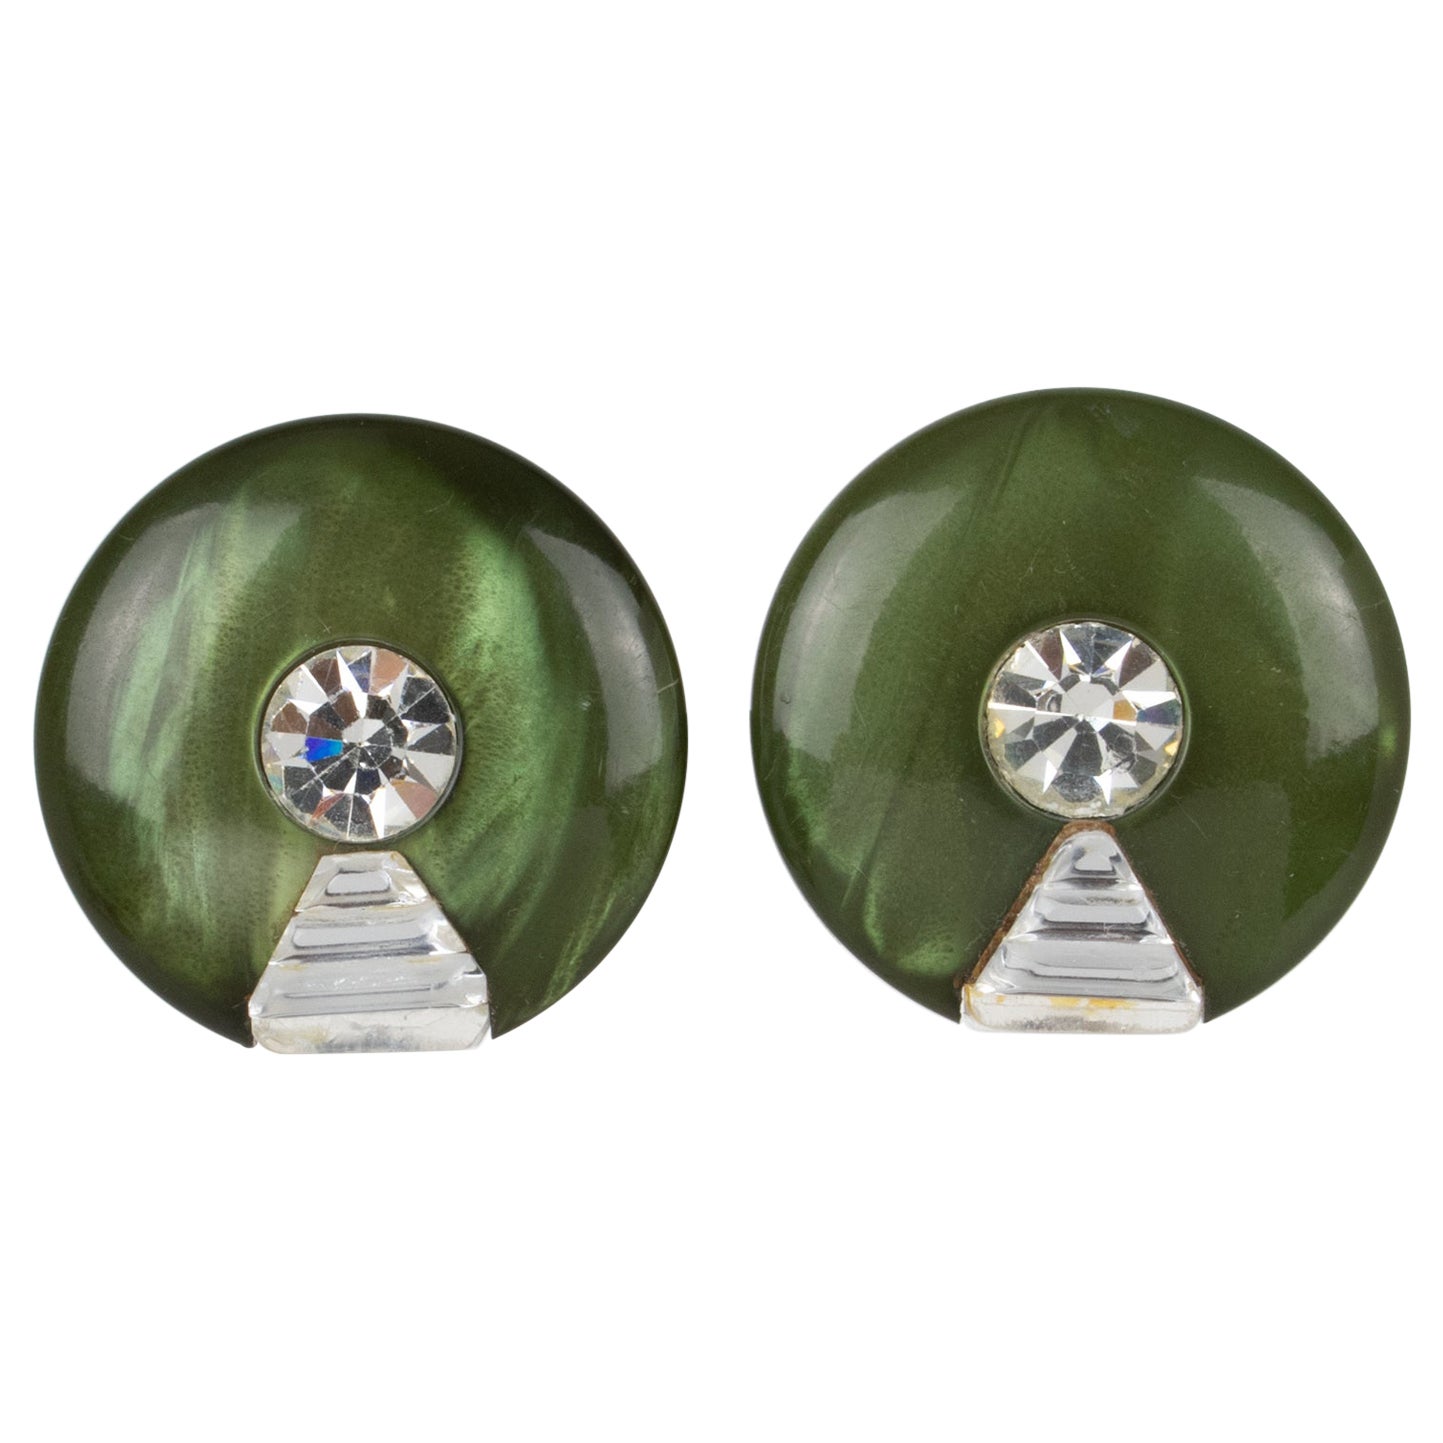 Pierre Cardin Paris Space Age Clip Earrings Green Lucite and Rhinestones